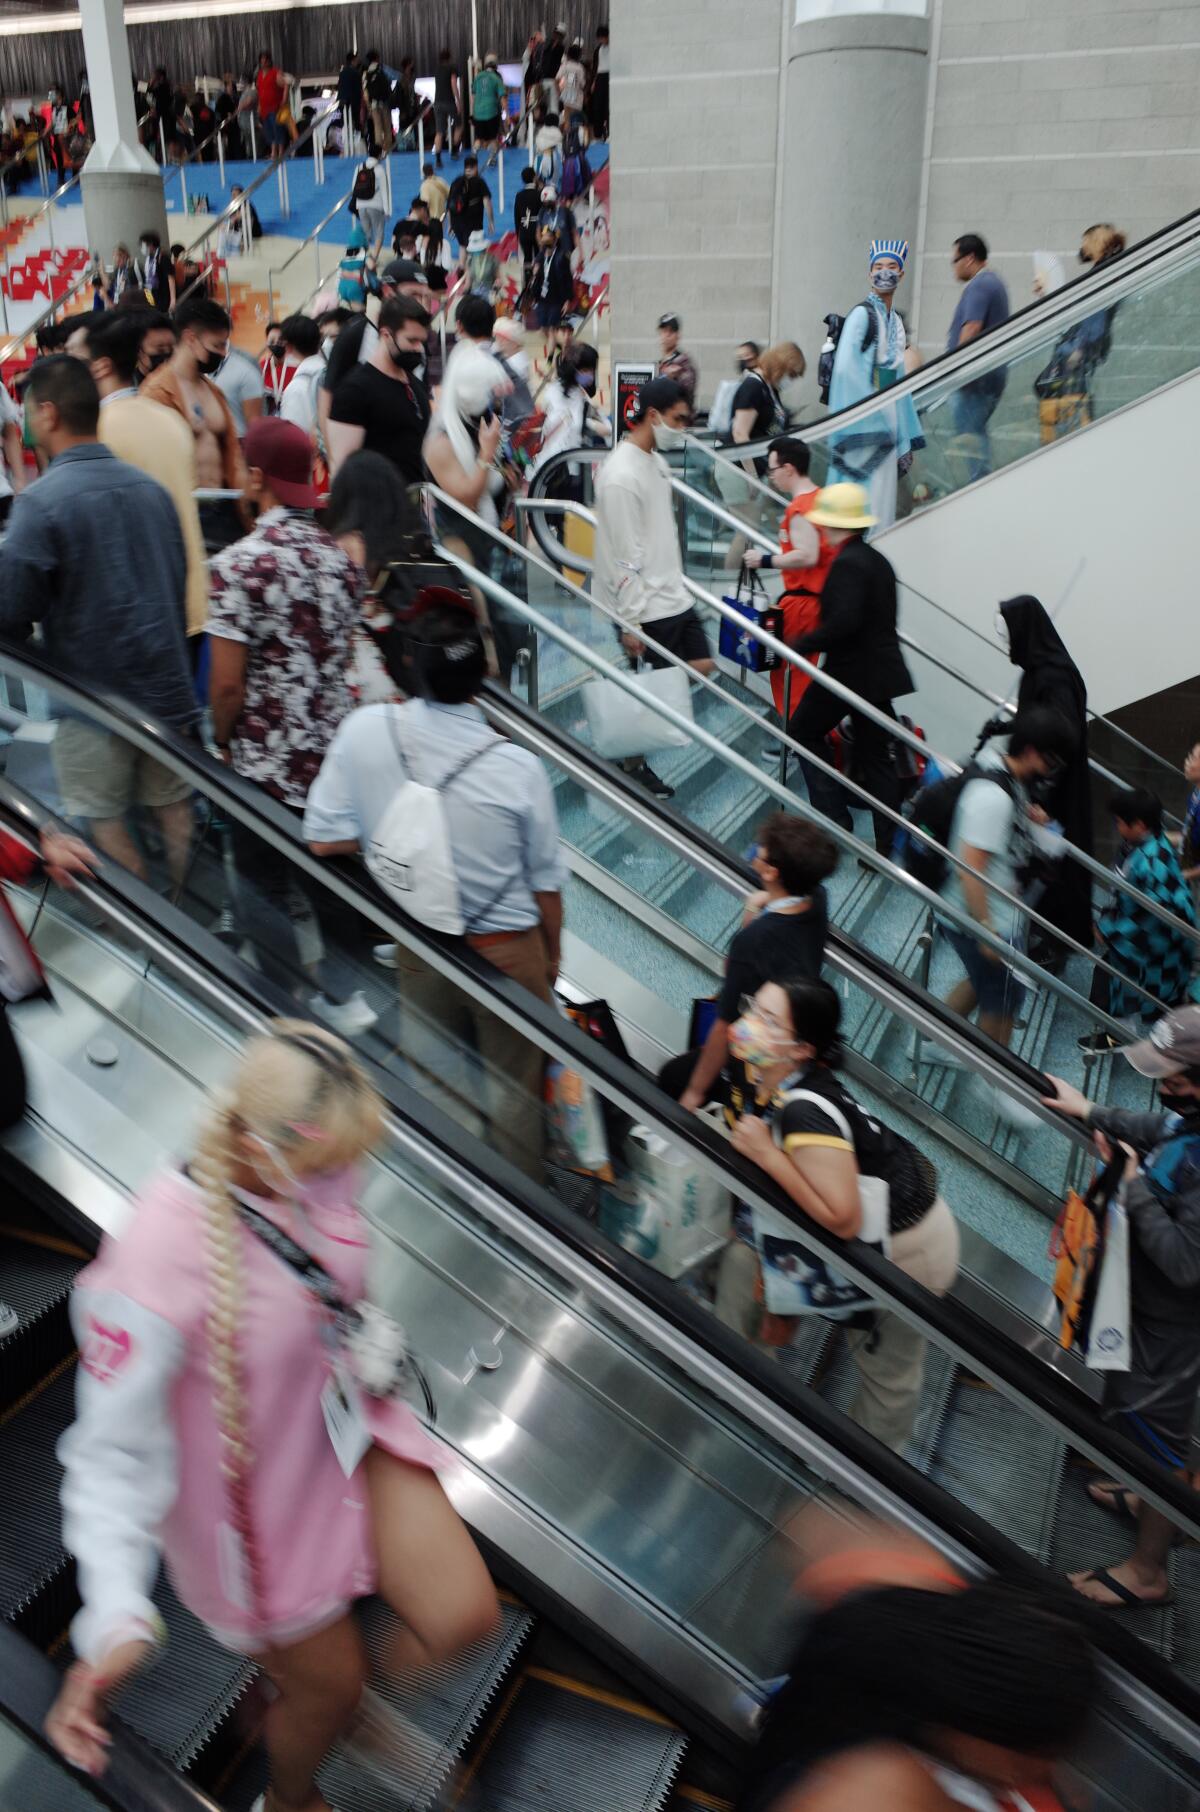 People on escalators, some wearing costumes